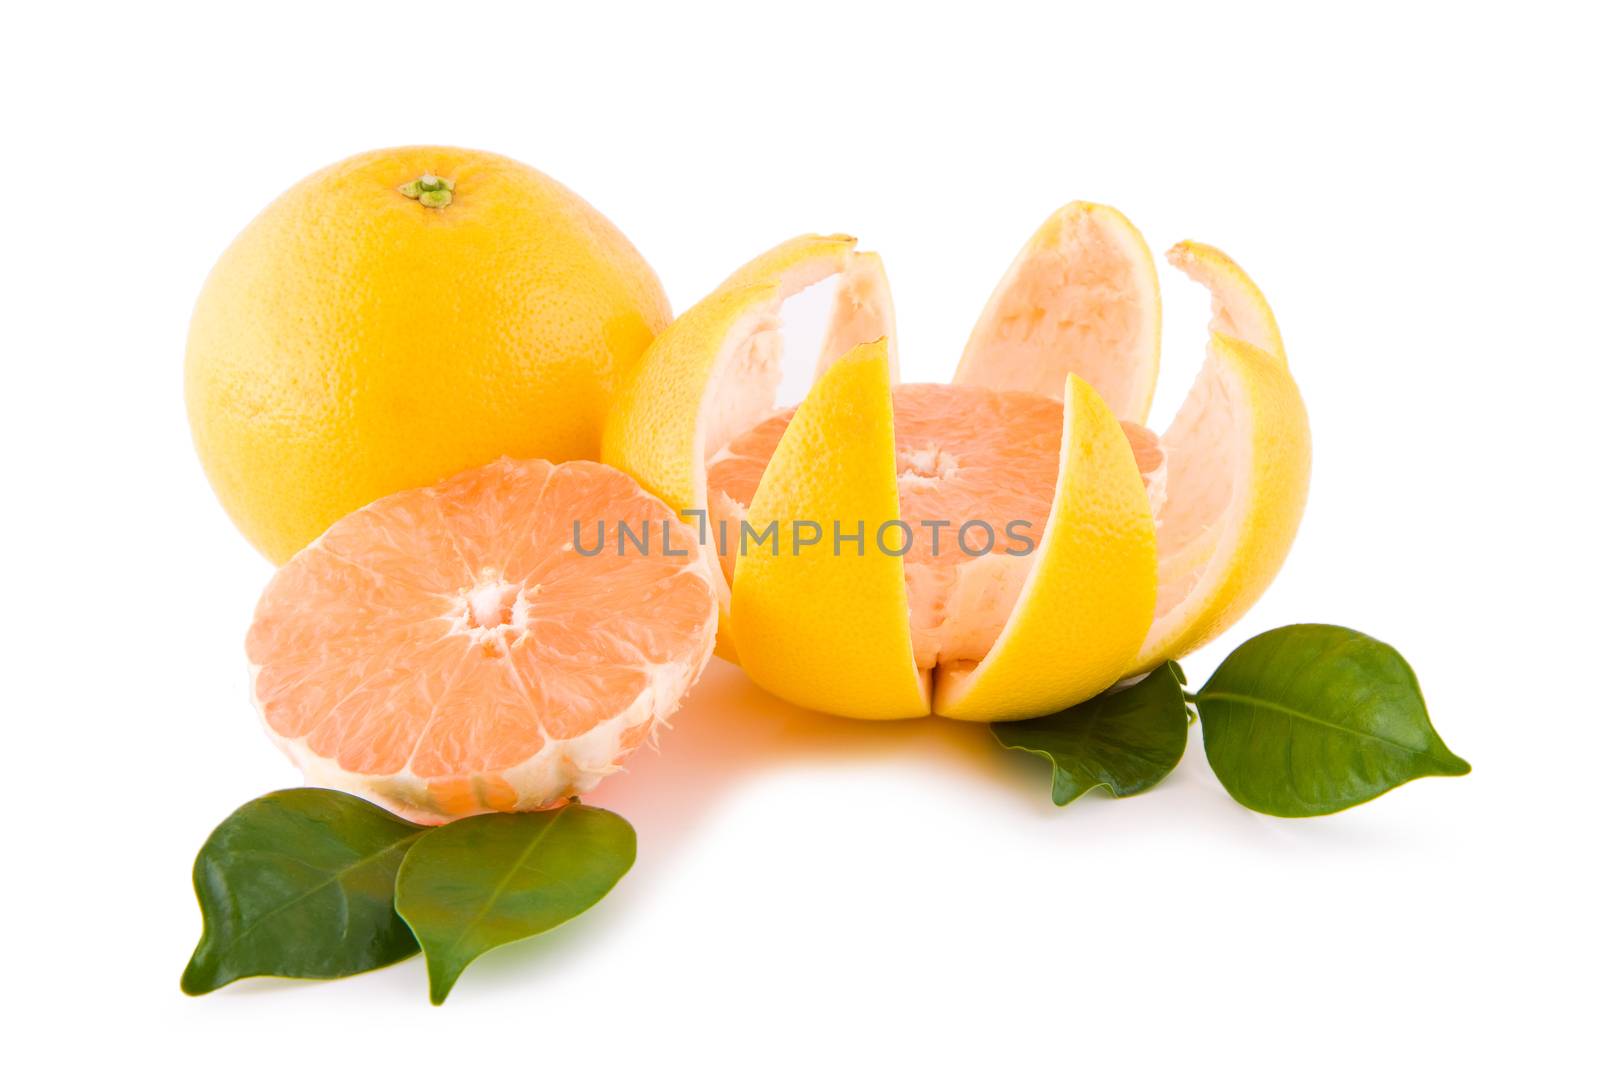 Red grapefruits with leafs by Gbuglok